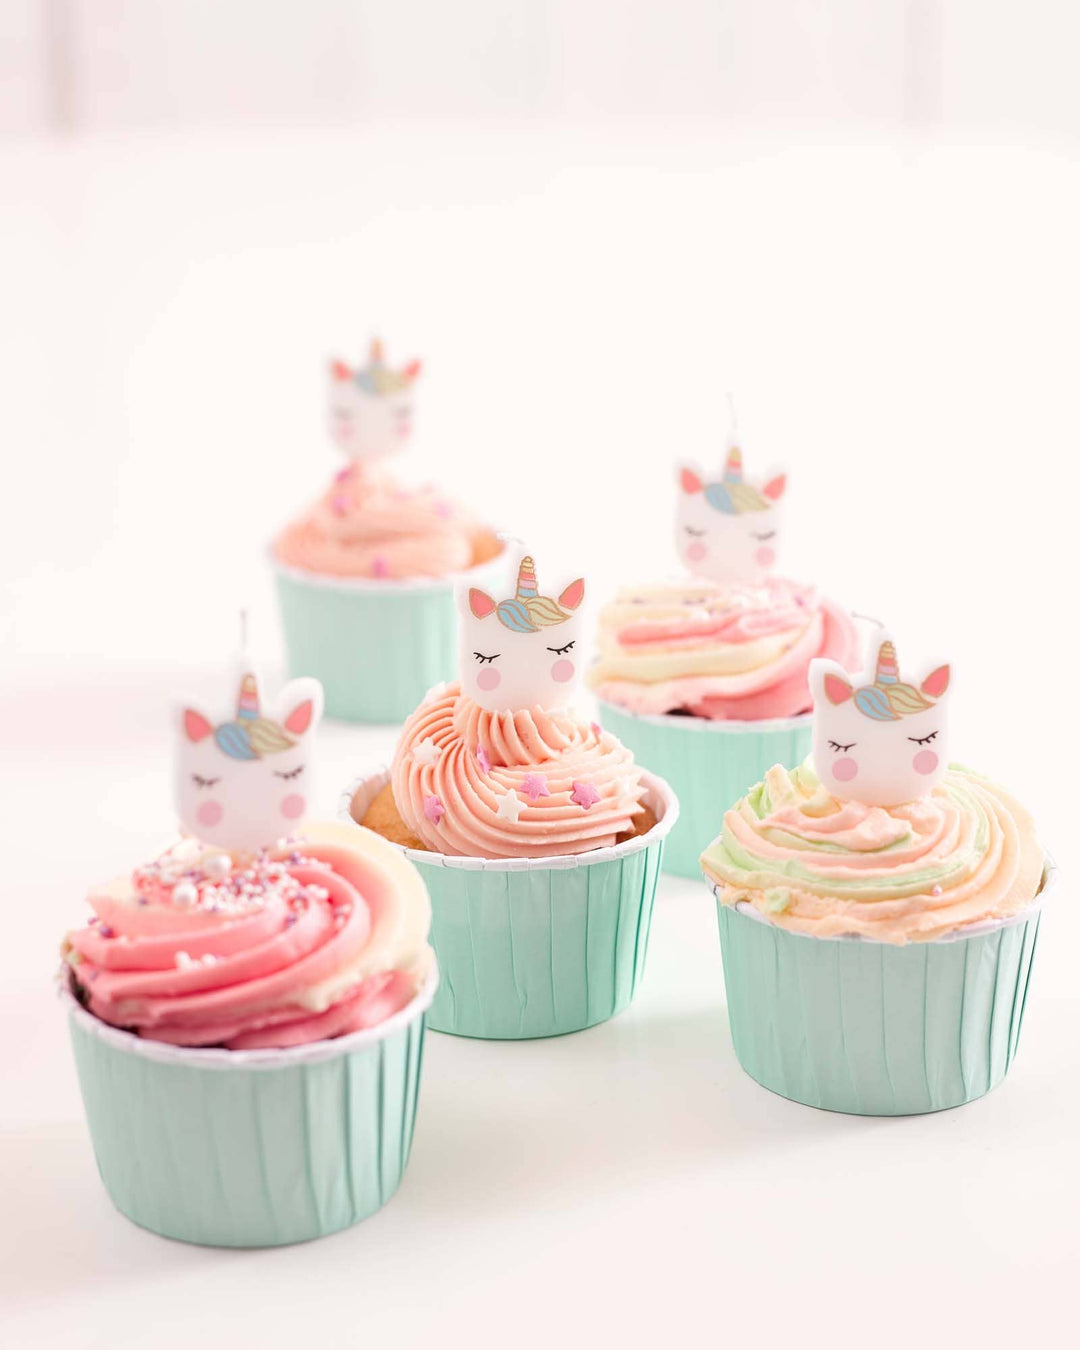 Unicorn Face Cake Candles - 5 Pack